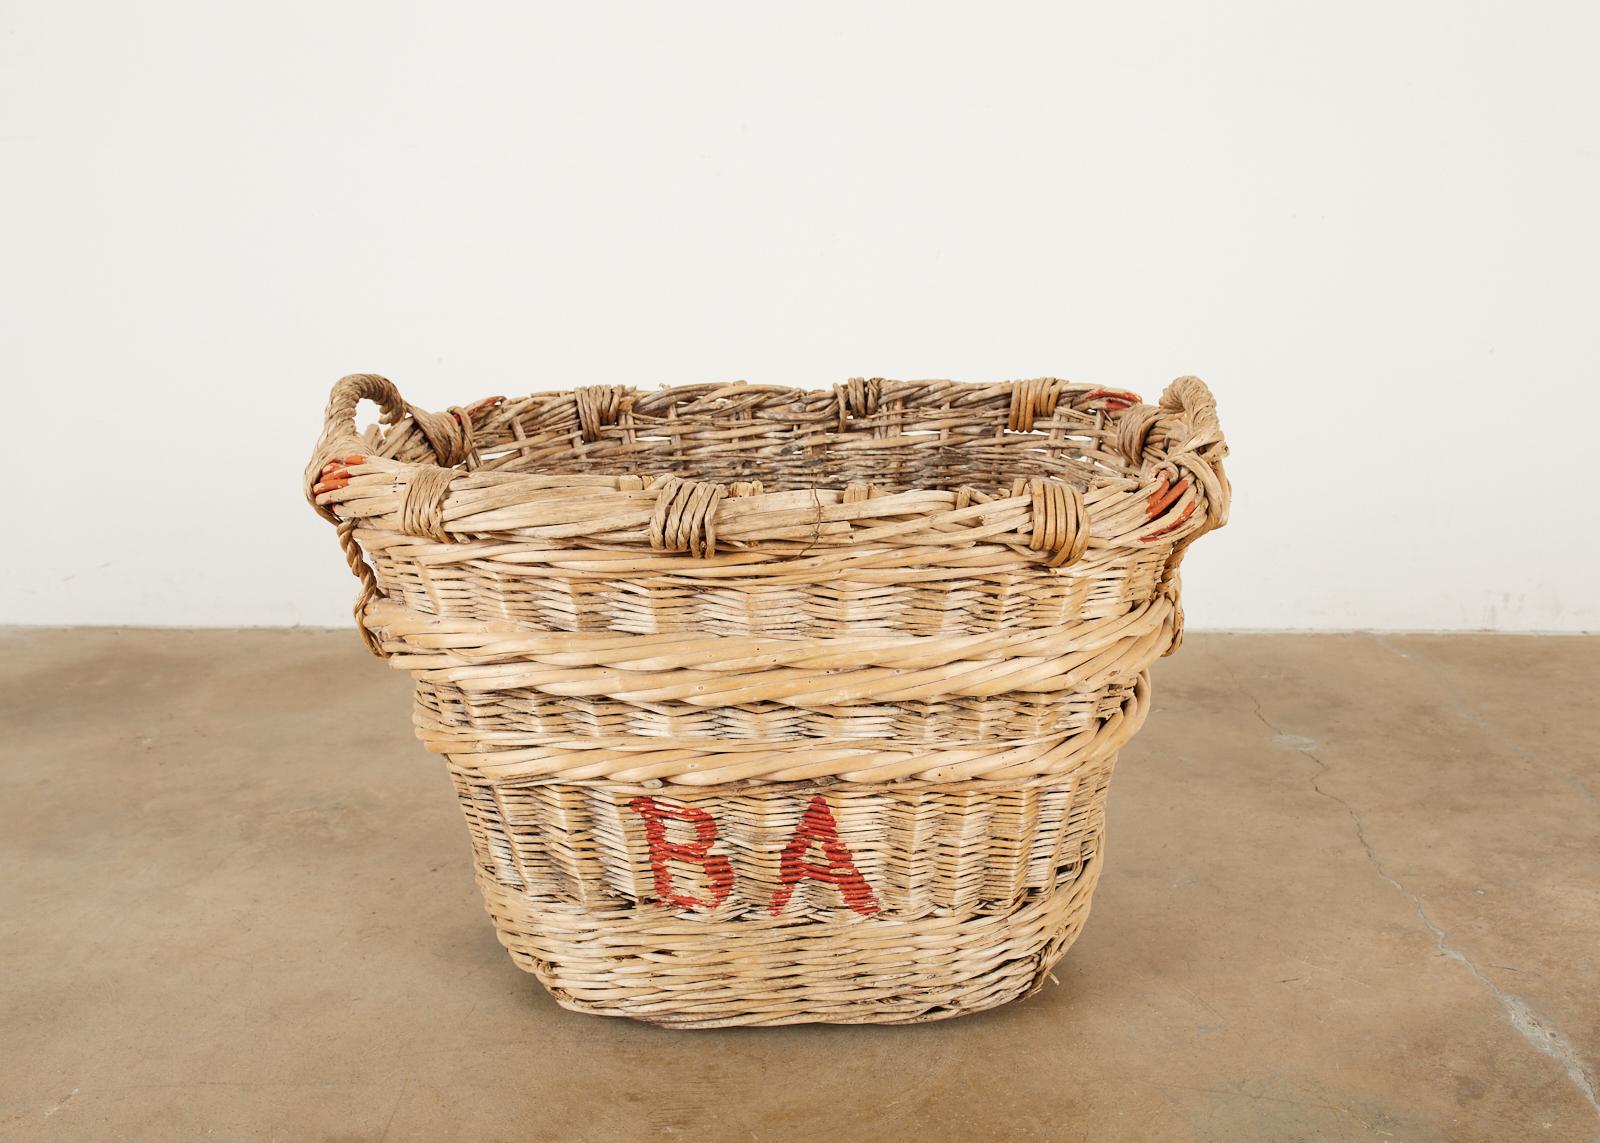 Rustic French chateau champagne grape harvesting basket constructed from woven wicker reeds. Features a thick braided top with handles on each end and brightly colored champagne house initials on the sides reading BA in vivid red paint. Reinforced